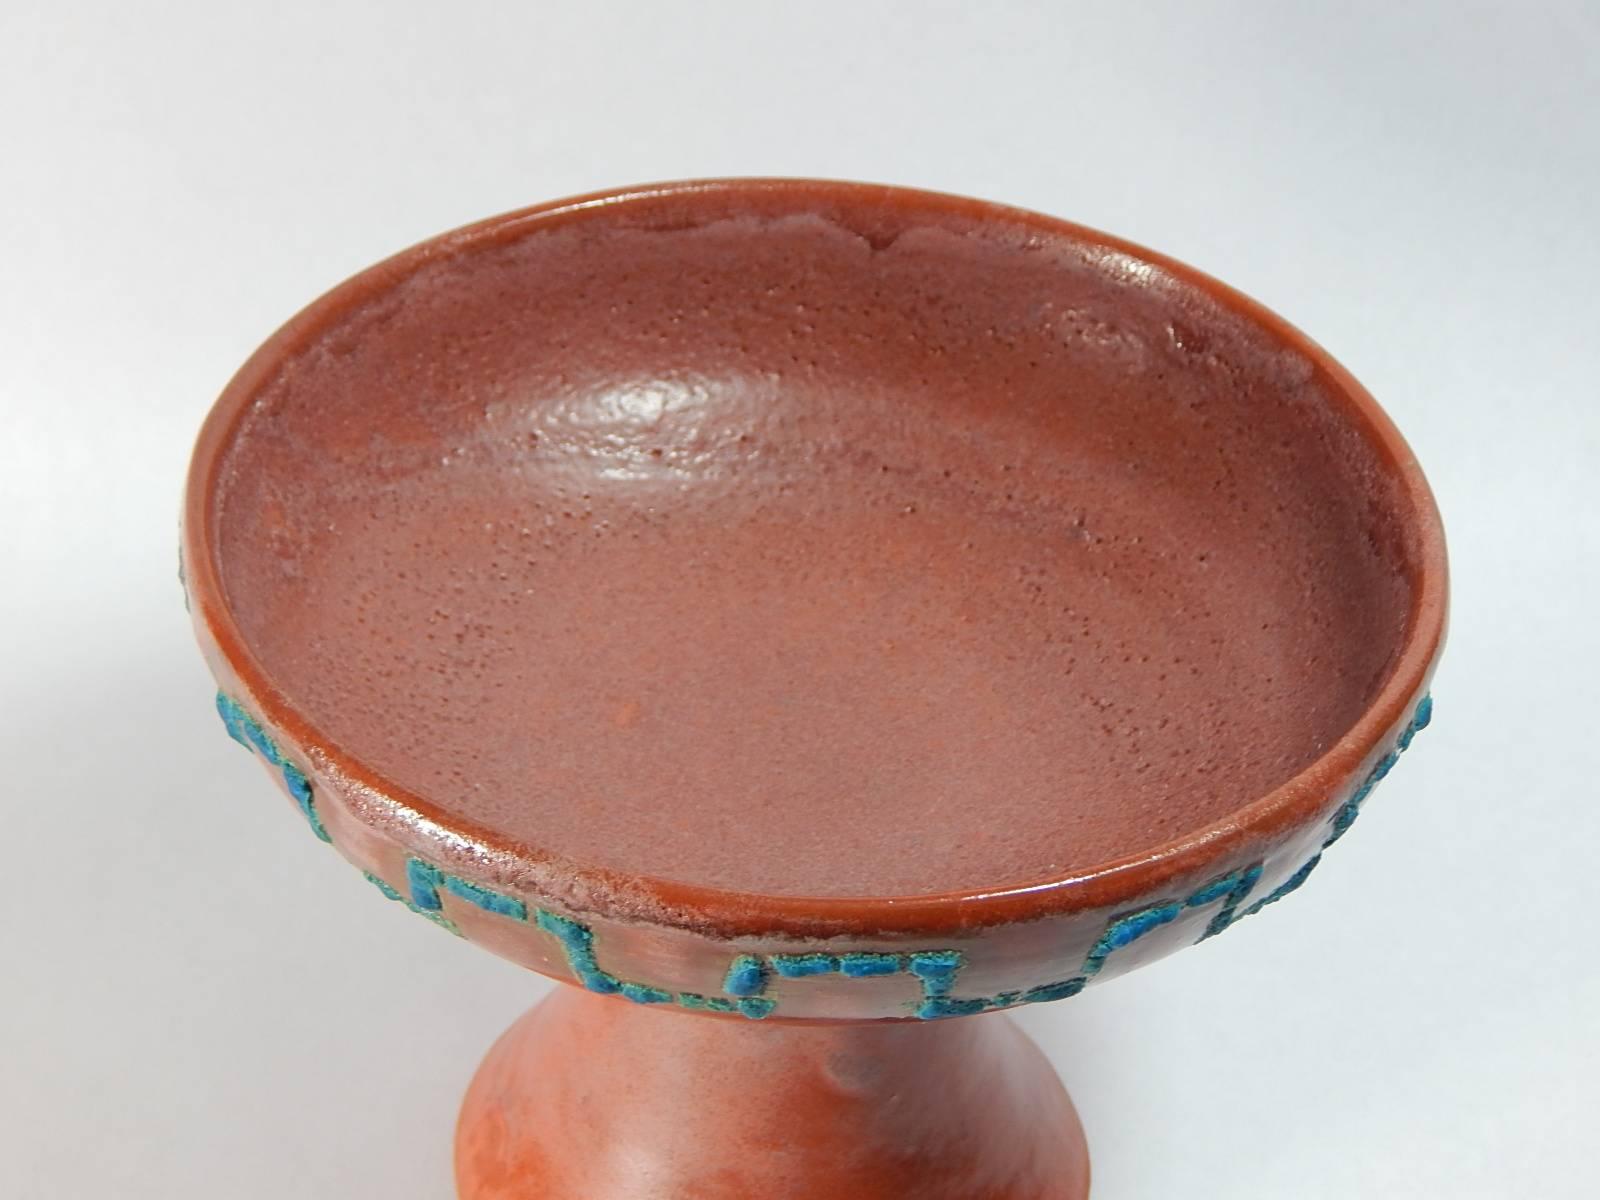 Relicware Earthenware Footed Bowl #65 By Andrew Wilder  In Excellent Condition For Sale In Richmond, VA